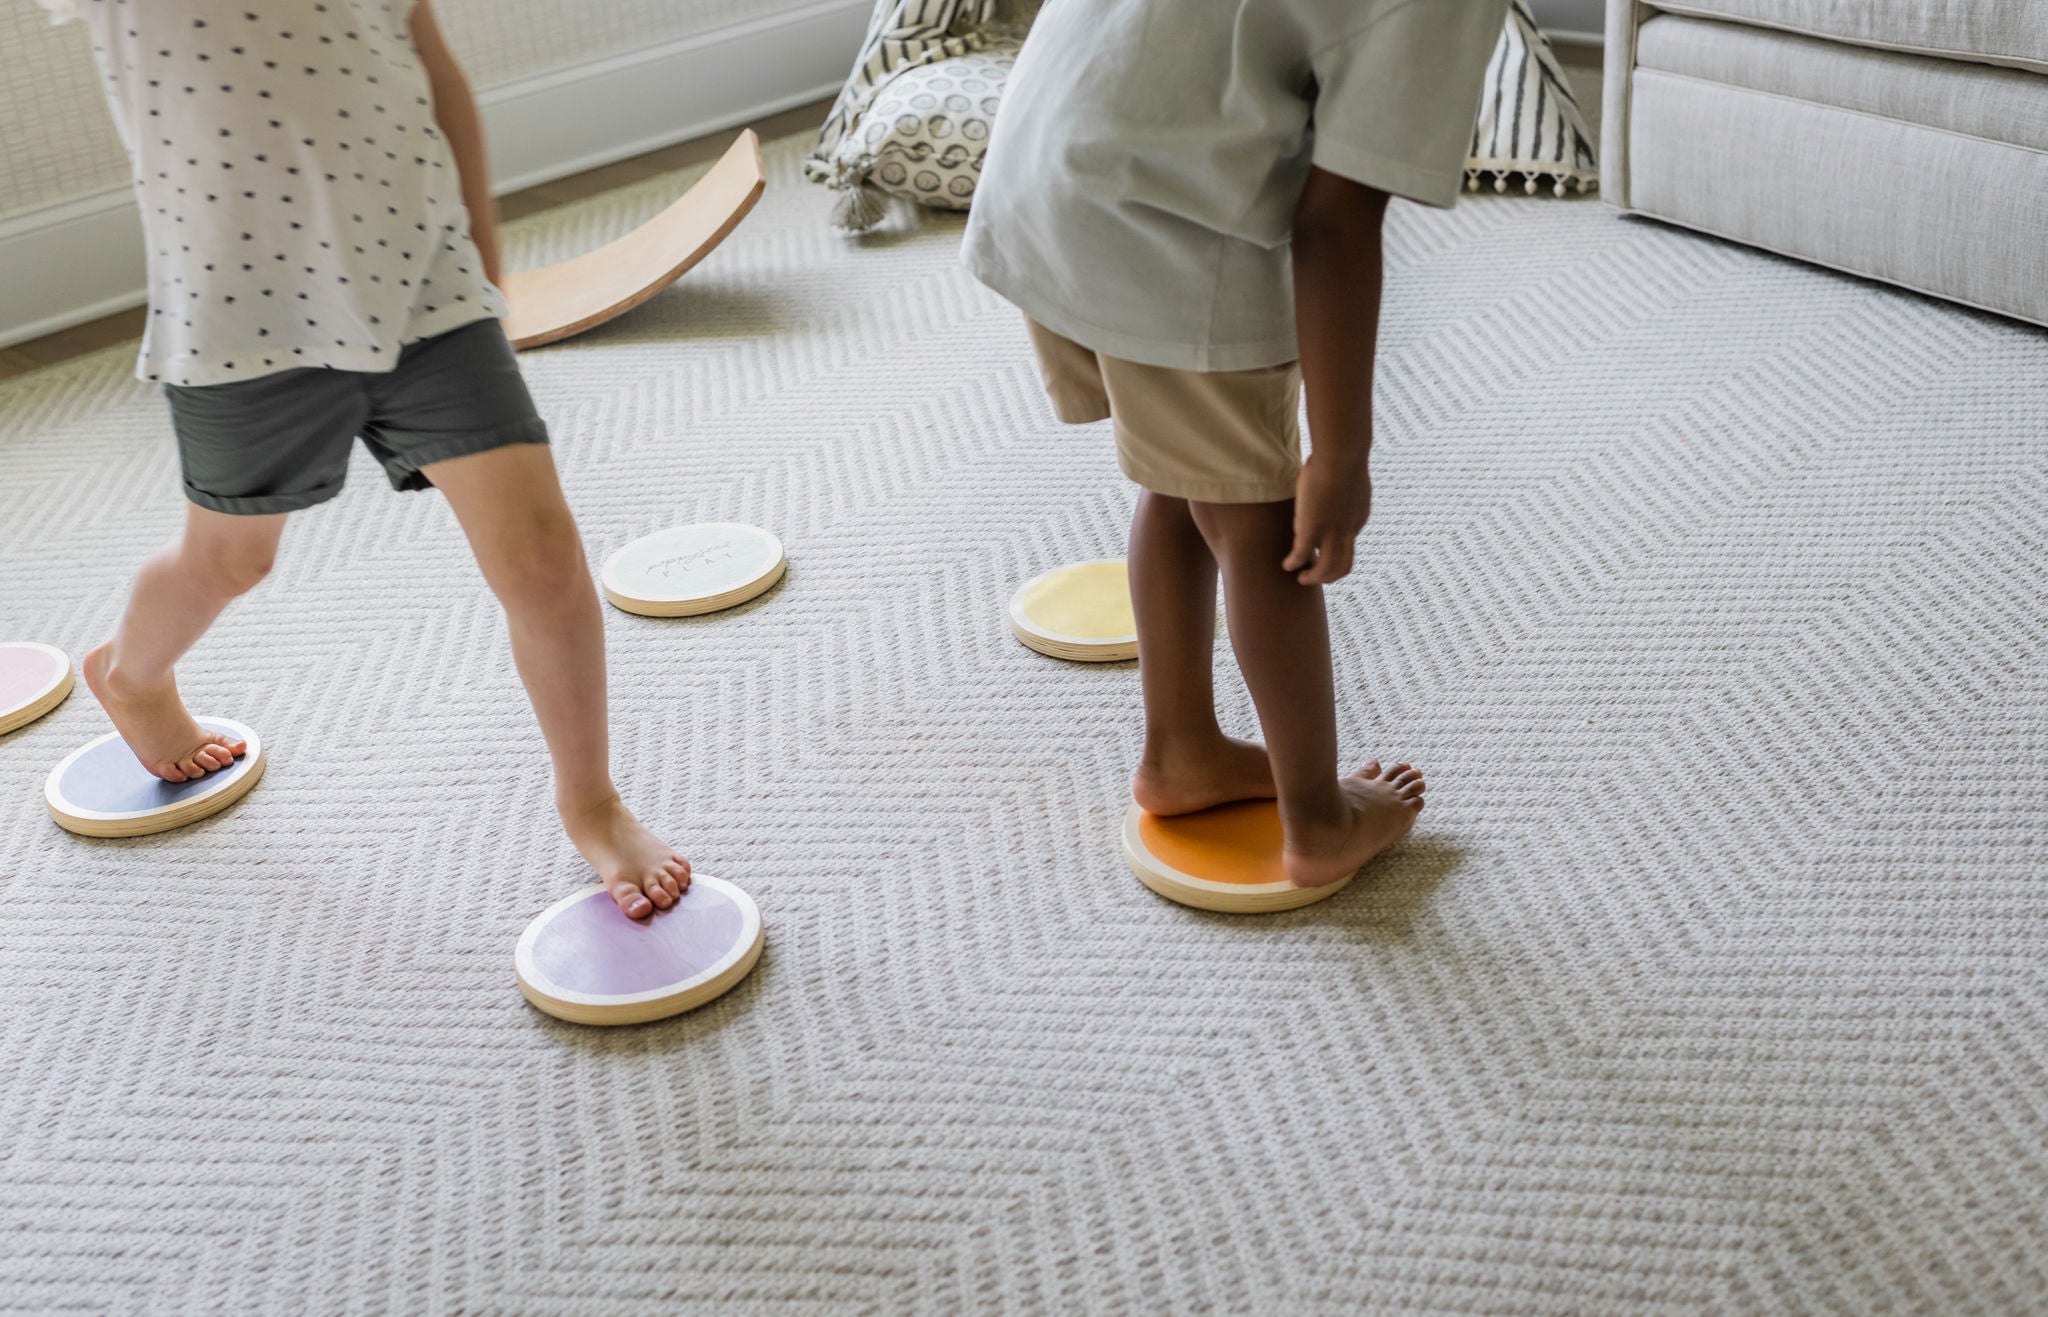 6 Games To Play With Your Balance Stepping Stones